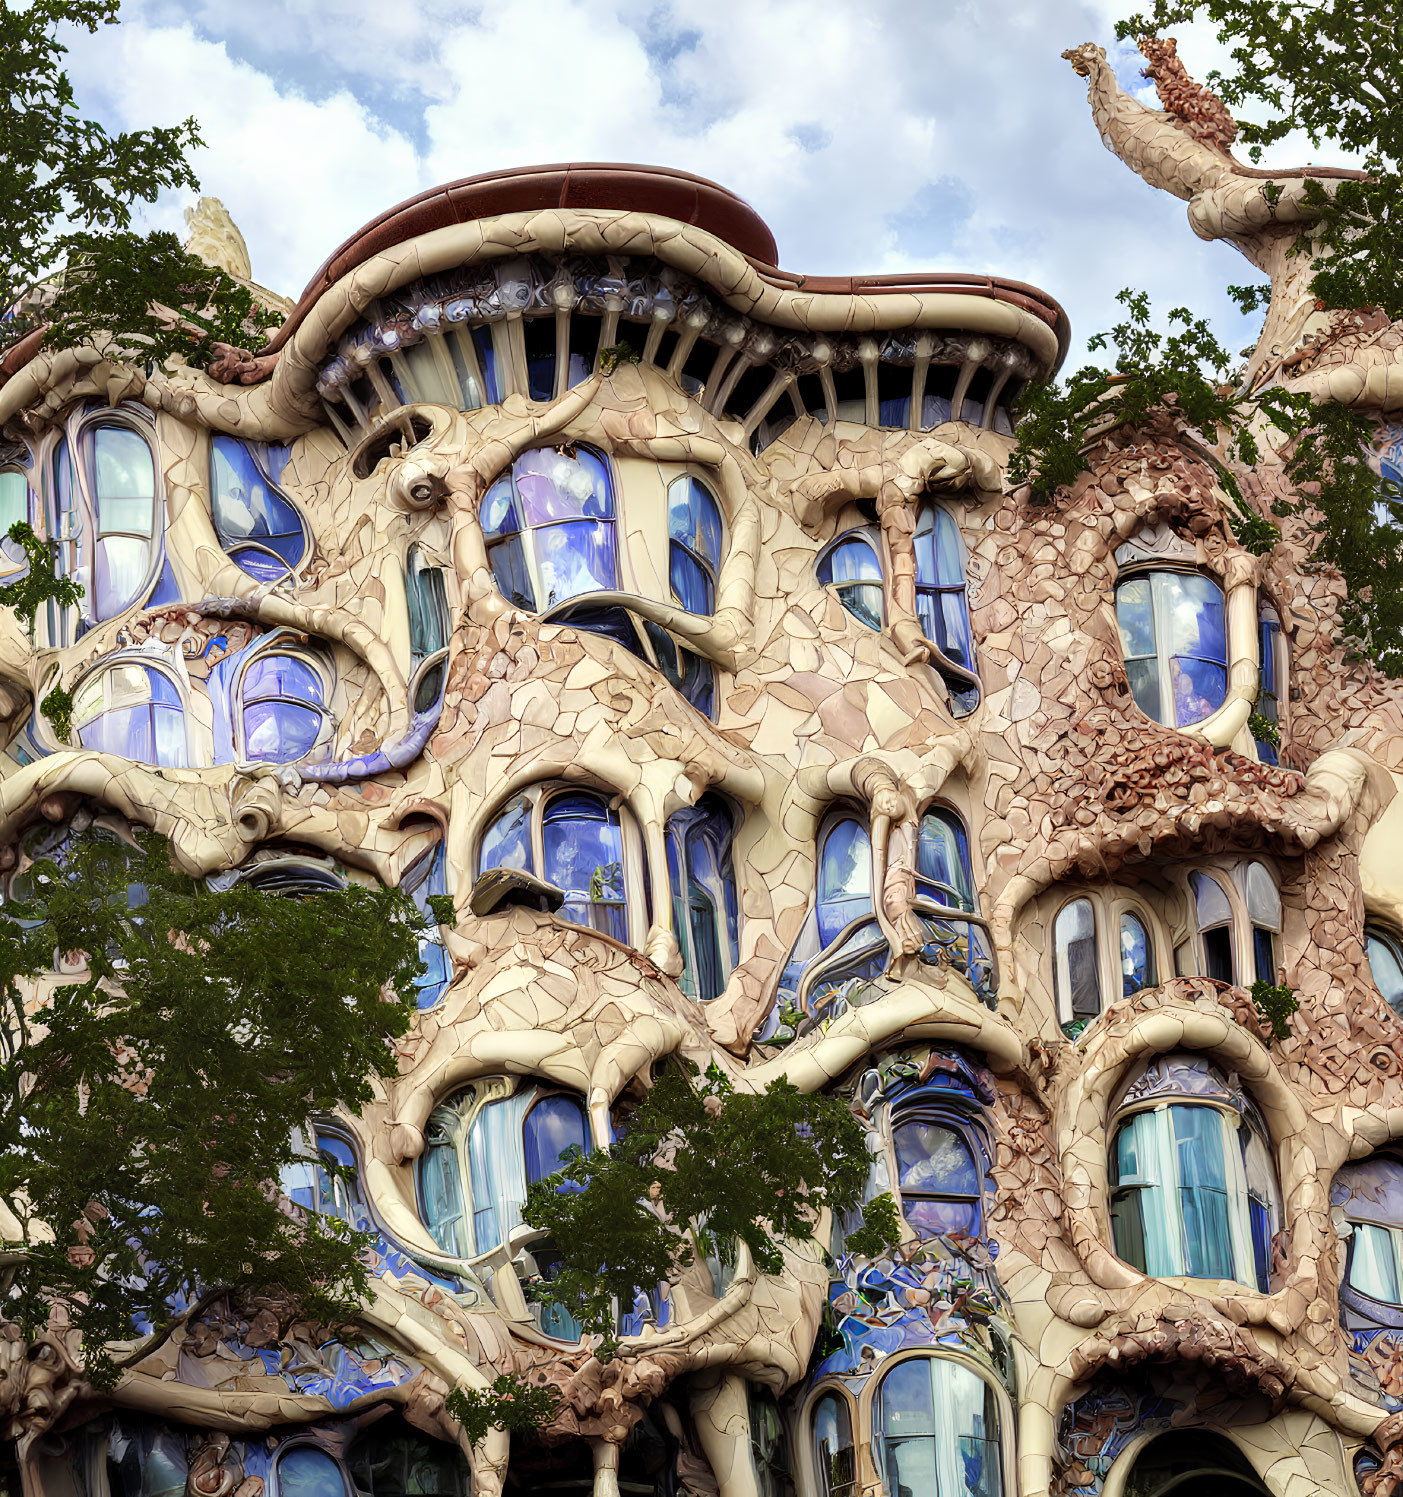 Whimsical architecture and colorful mosaics in Casa Batlló, Barcelona